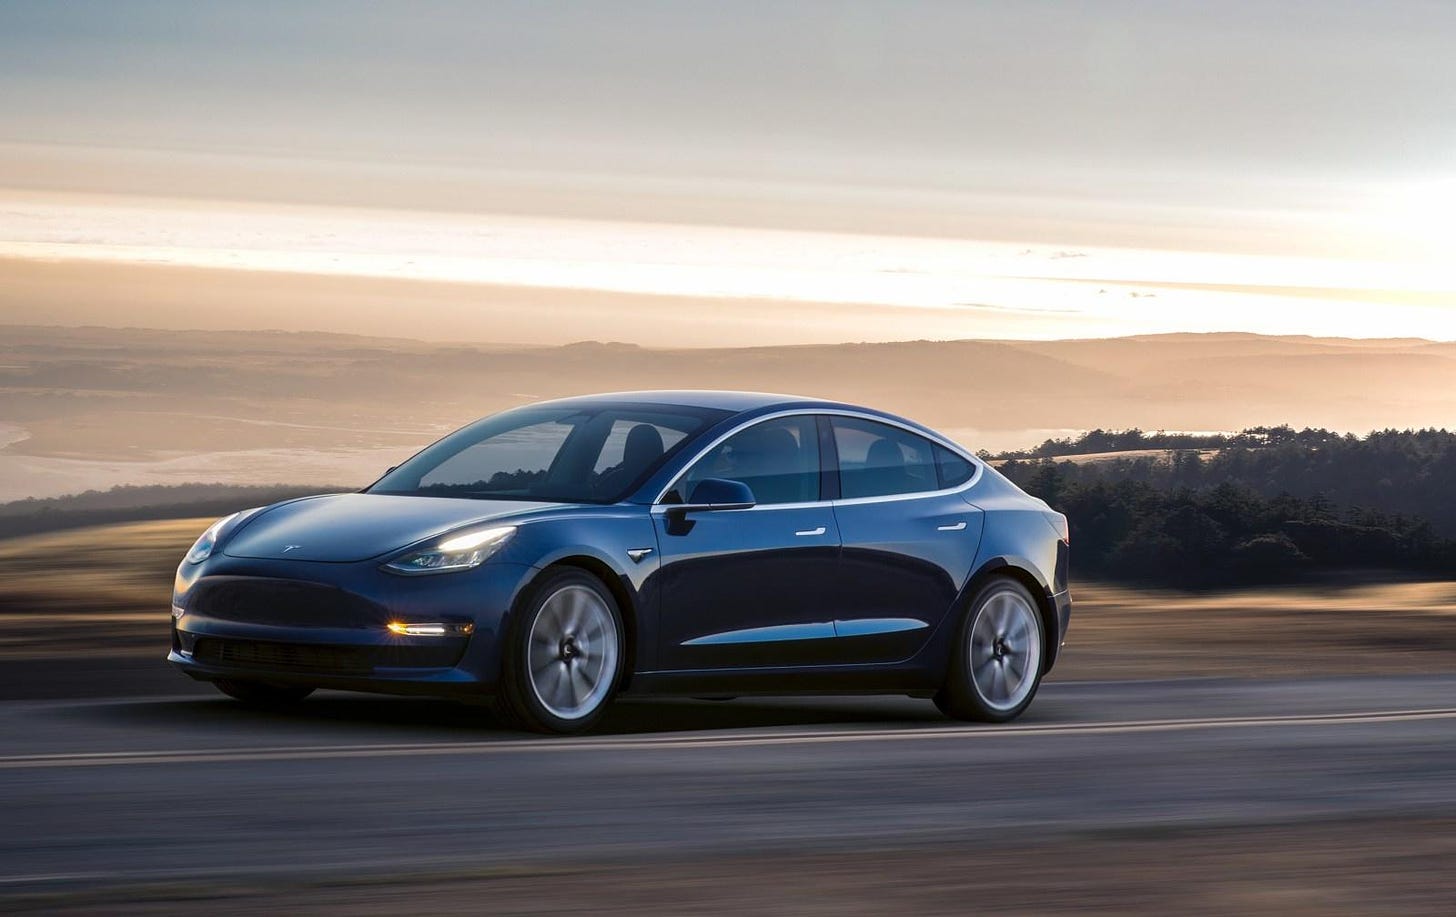 The Dutch government claims it can decrypt Tesla's hidden driving data |  Engadget